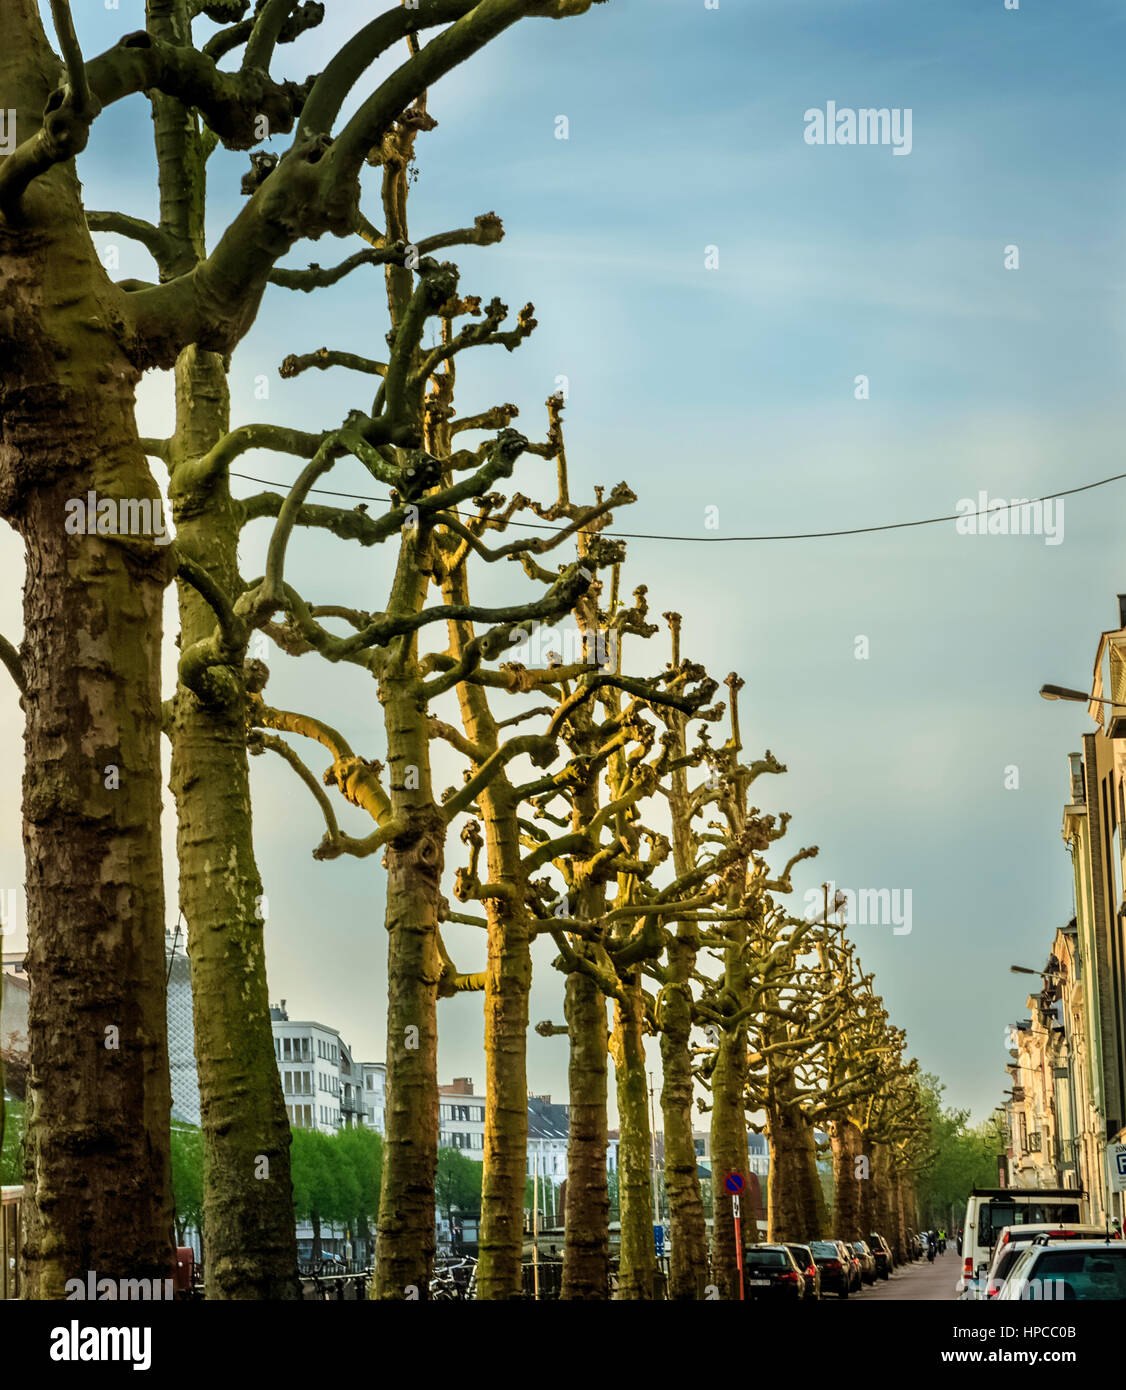 Long row of tall trees on a street in Ghent, Belgium Stock Photo